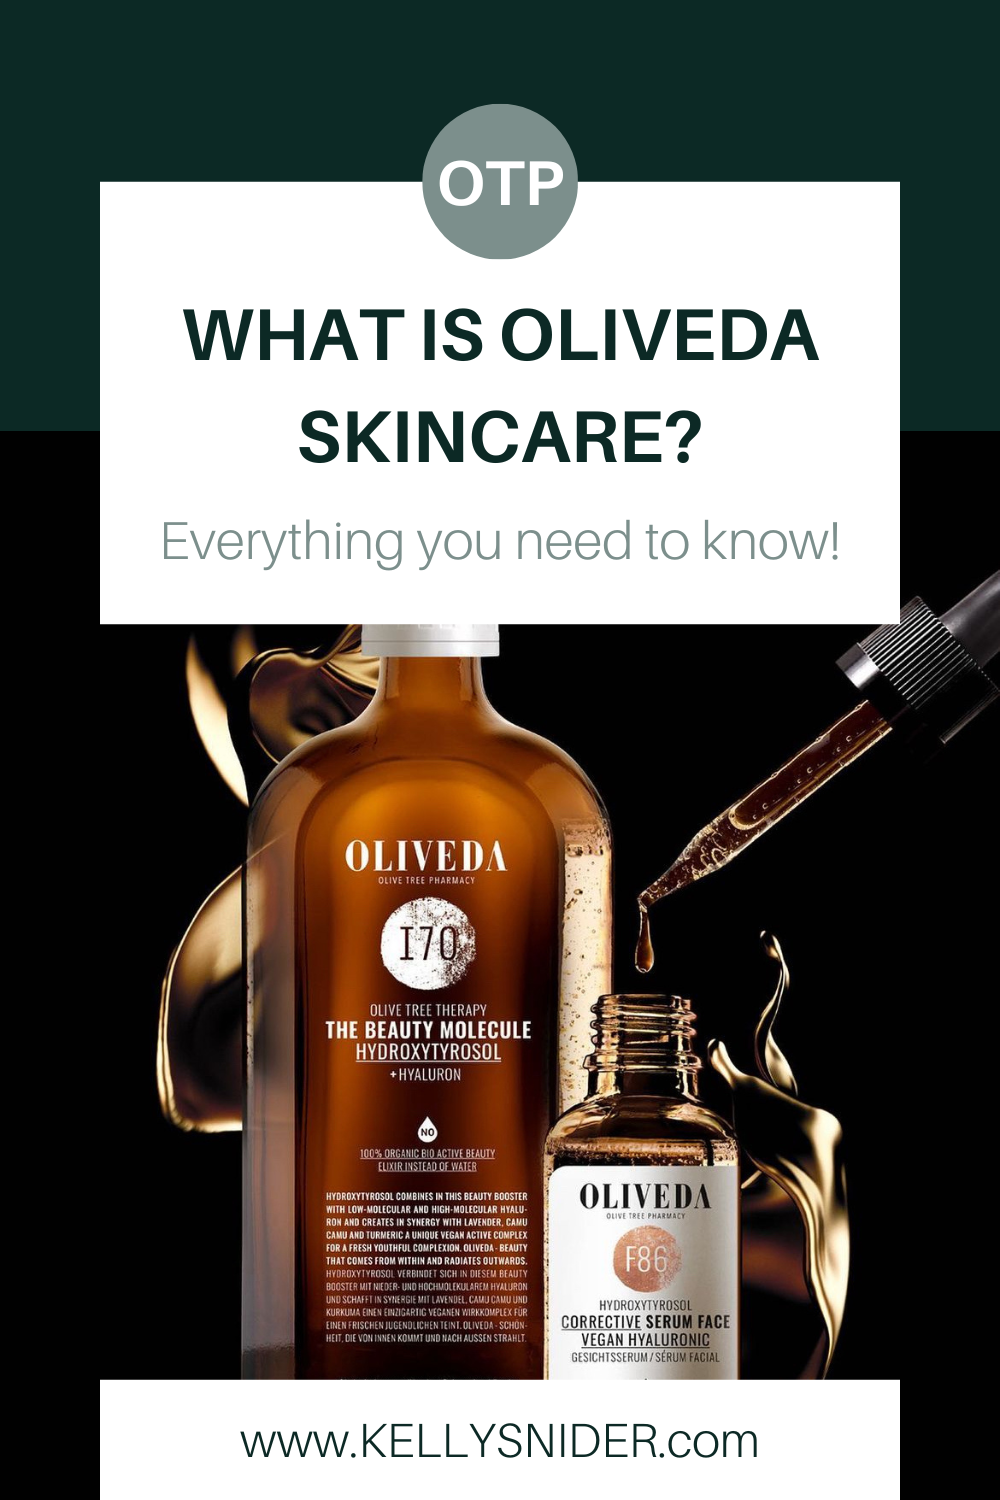 Oliveda Skincare The Secret To Transforming Your Skin Kelly Snider 5544